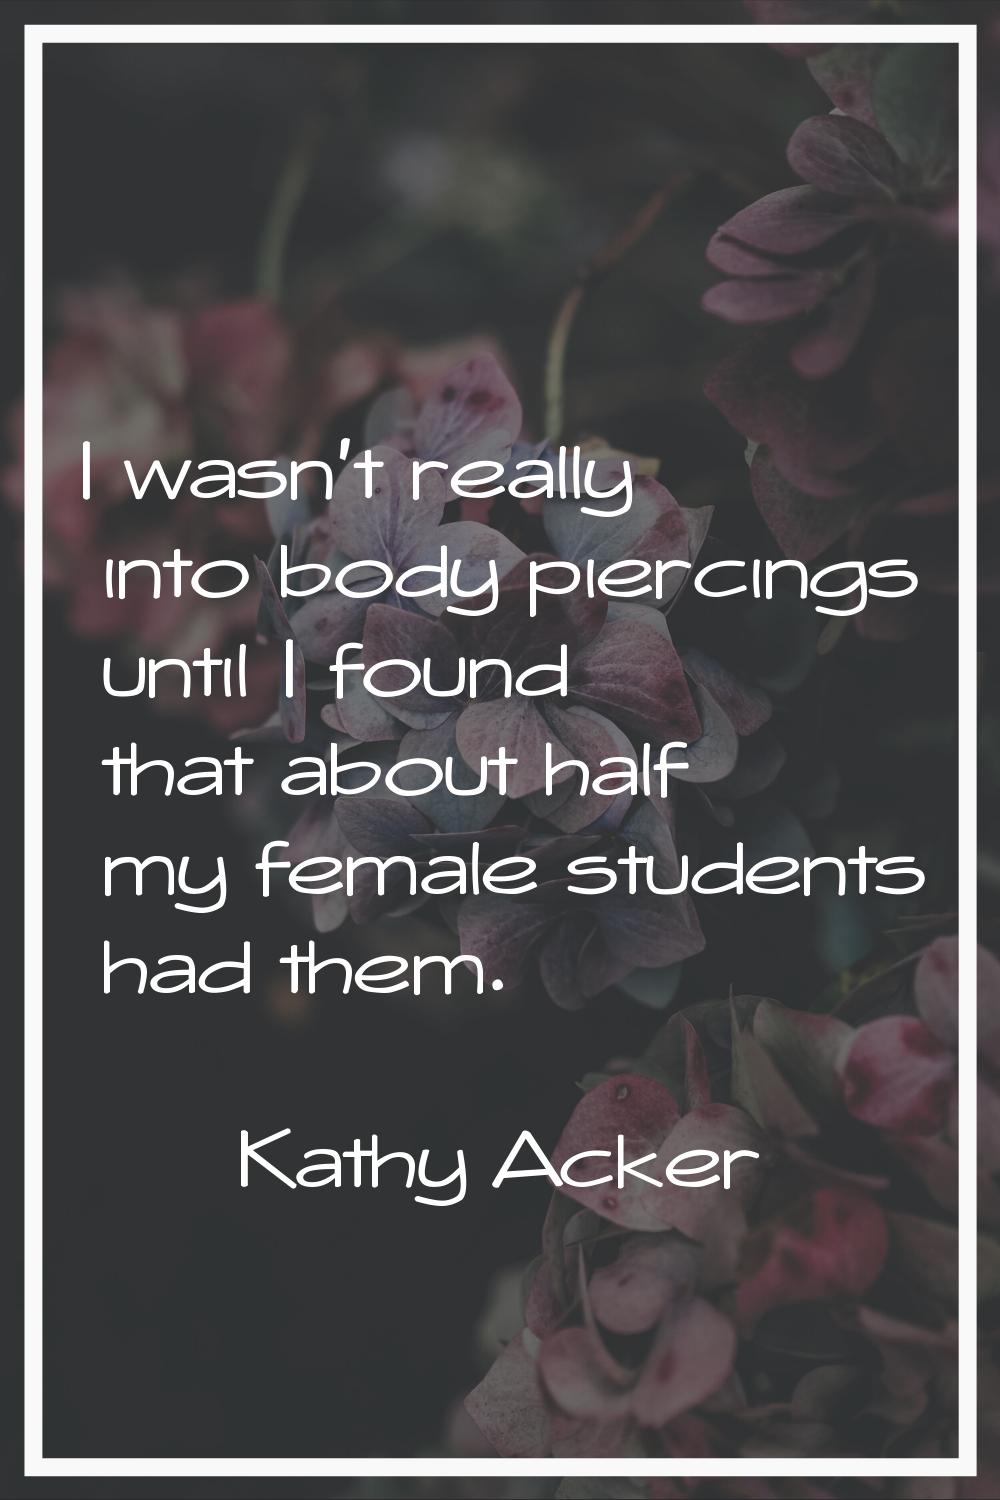 I wasn't really into body piercings until I found that about half my female students had them.